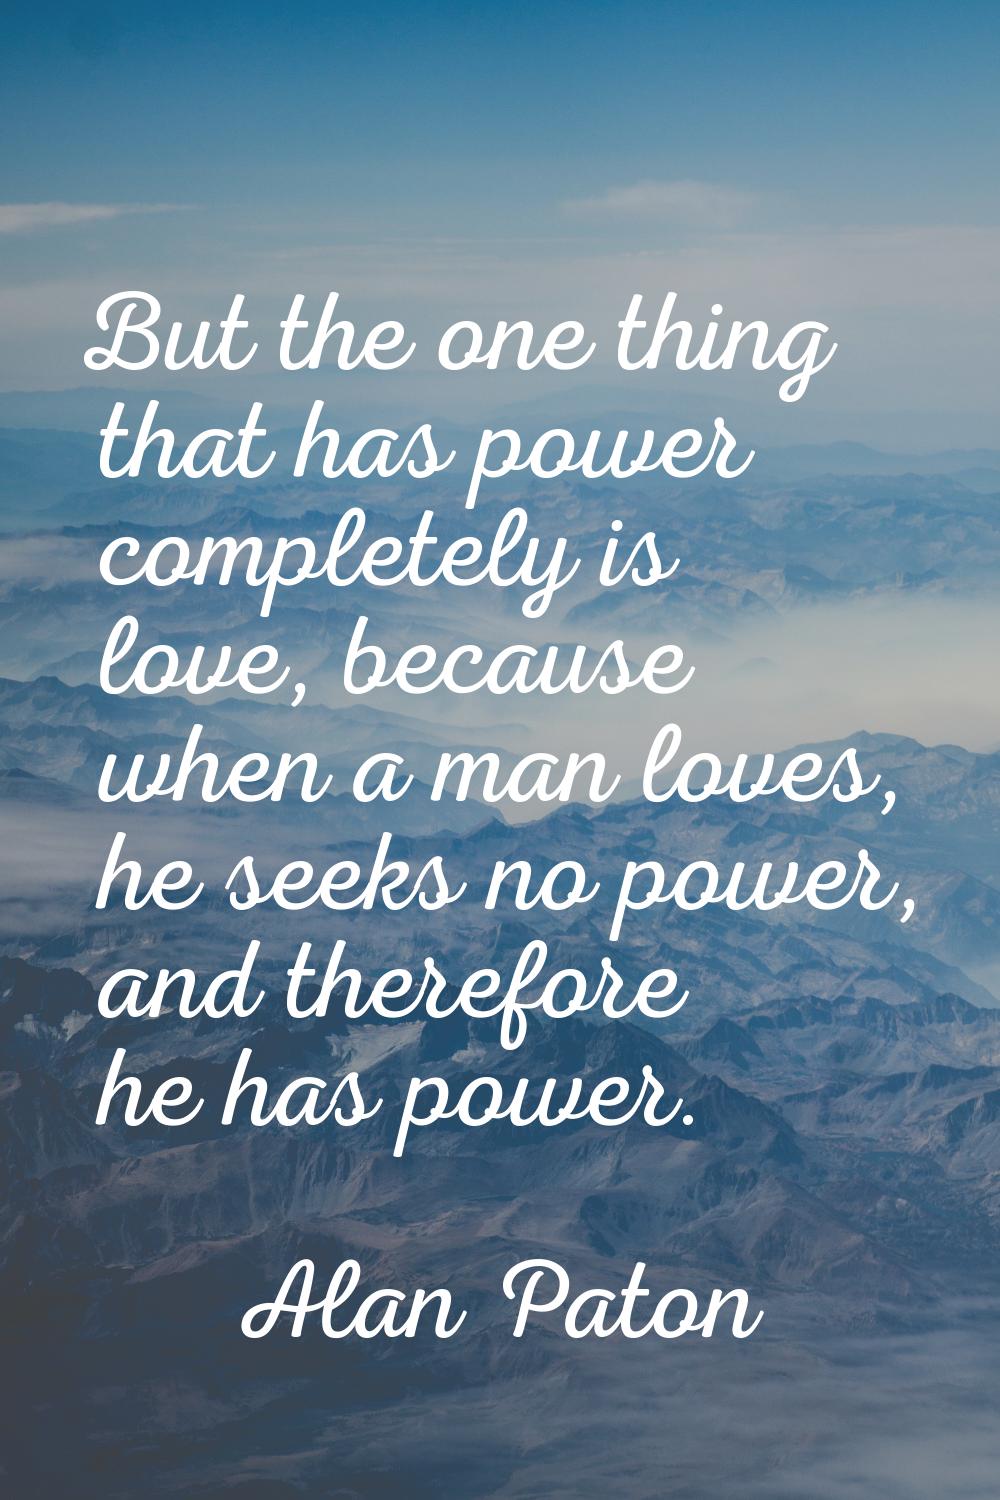 But the one thing that has power completely is love, because when a man loves, he seeks no power, a